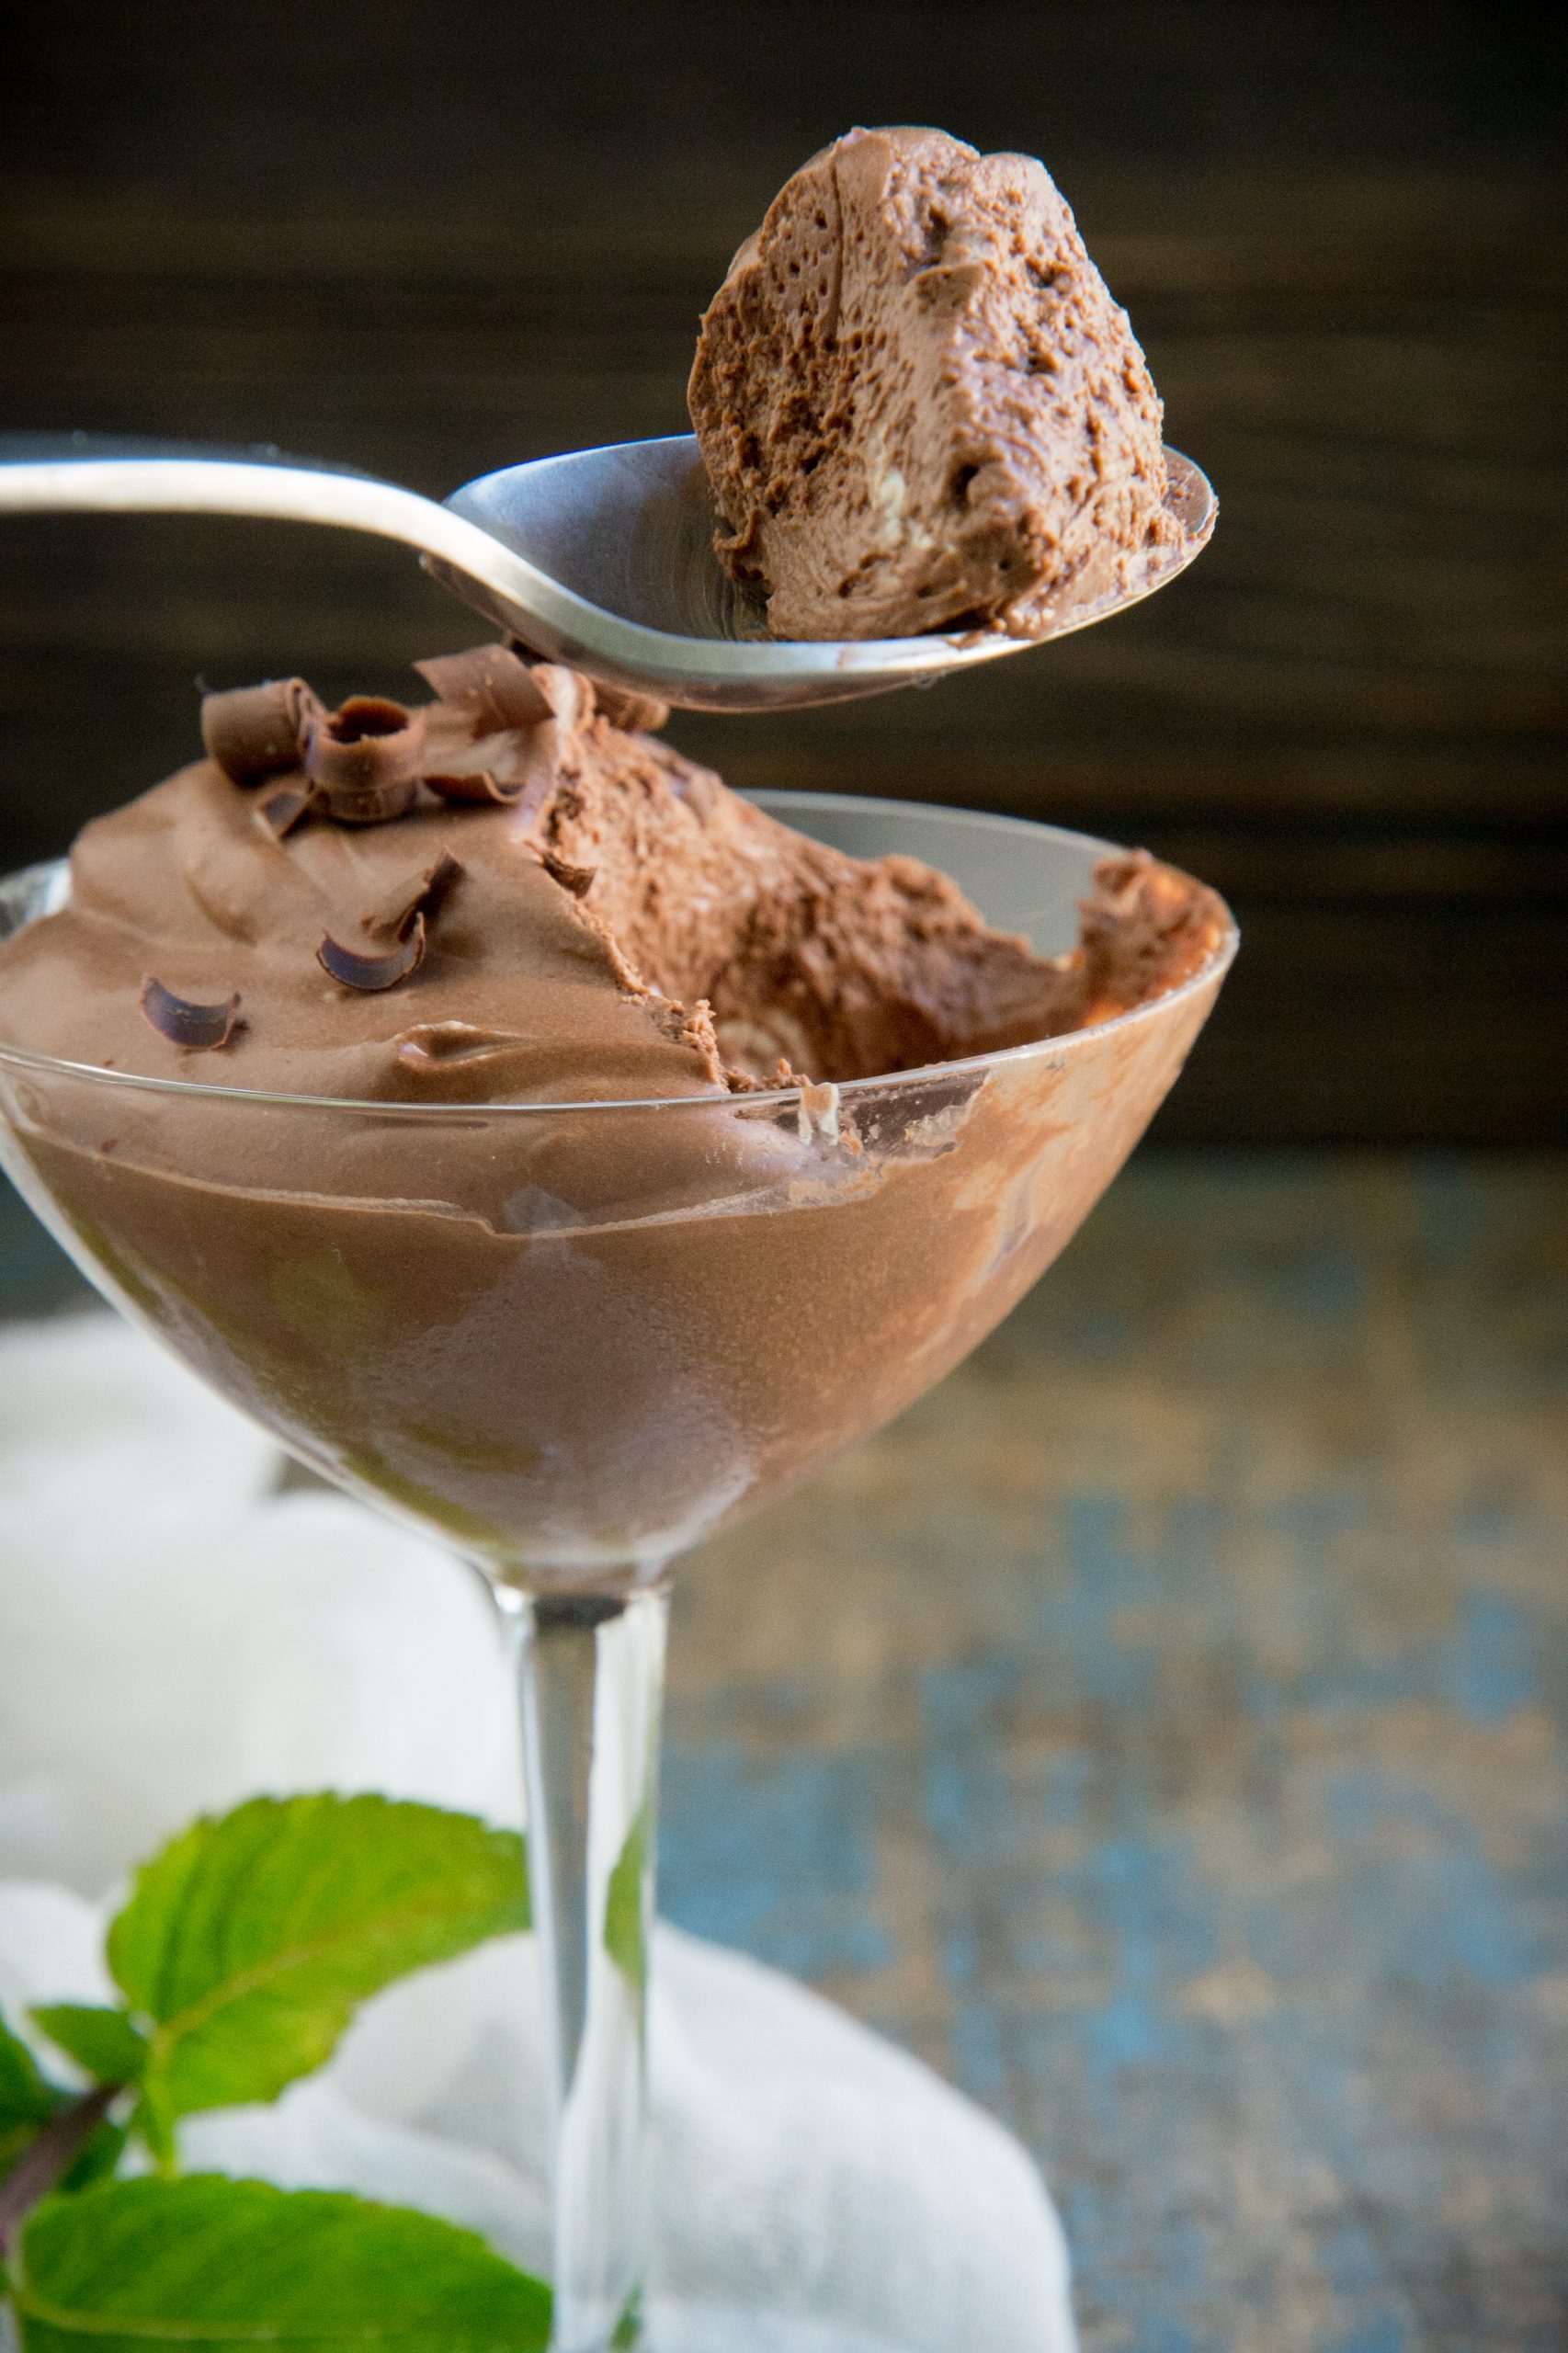 Taking a spoonful of keto chocolate mousse.